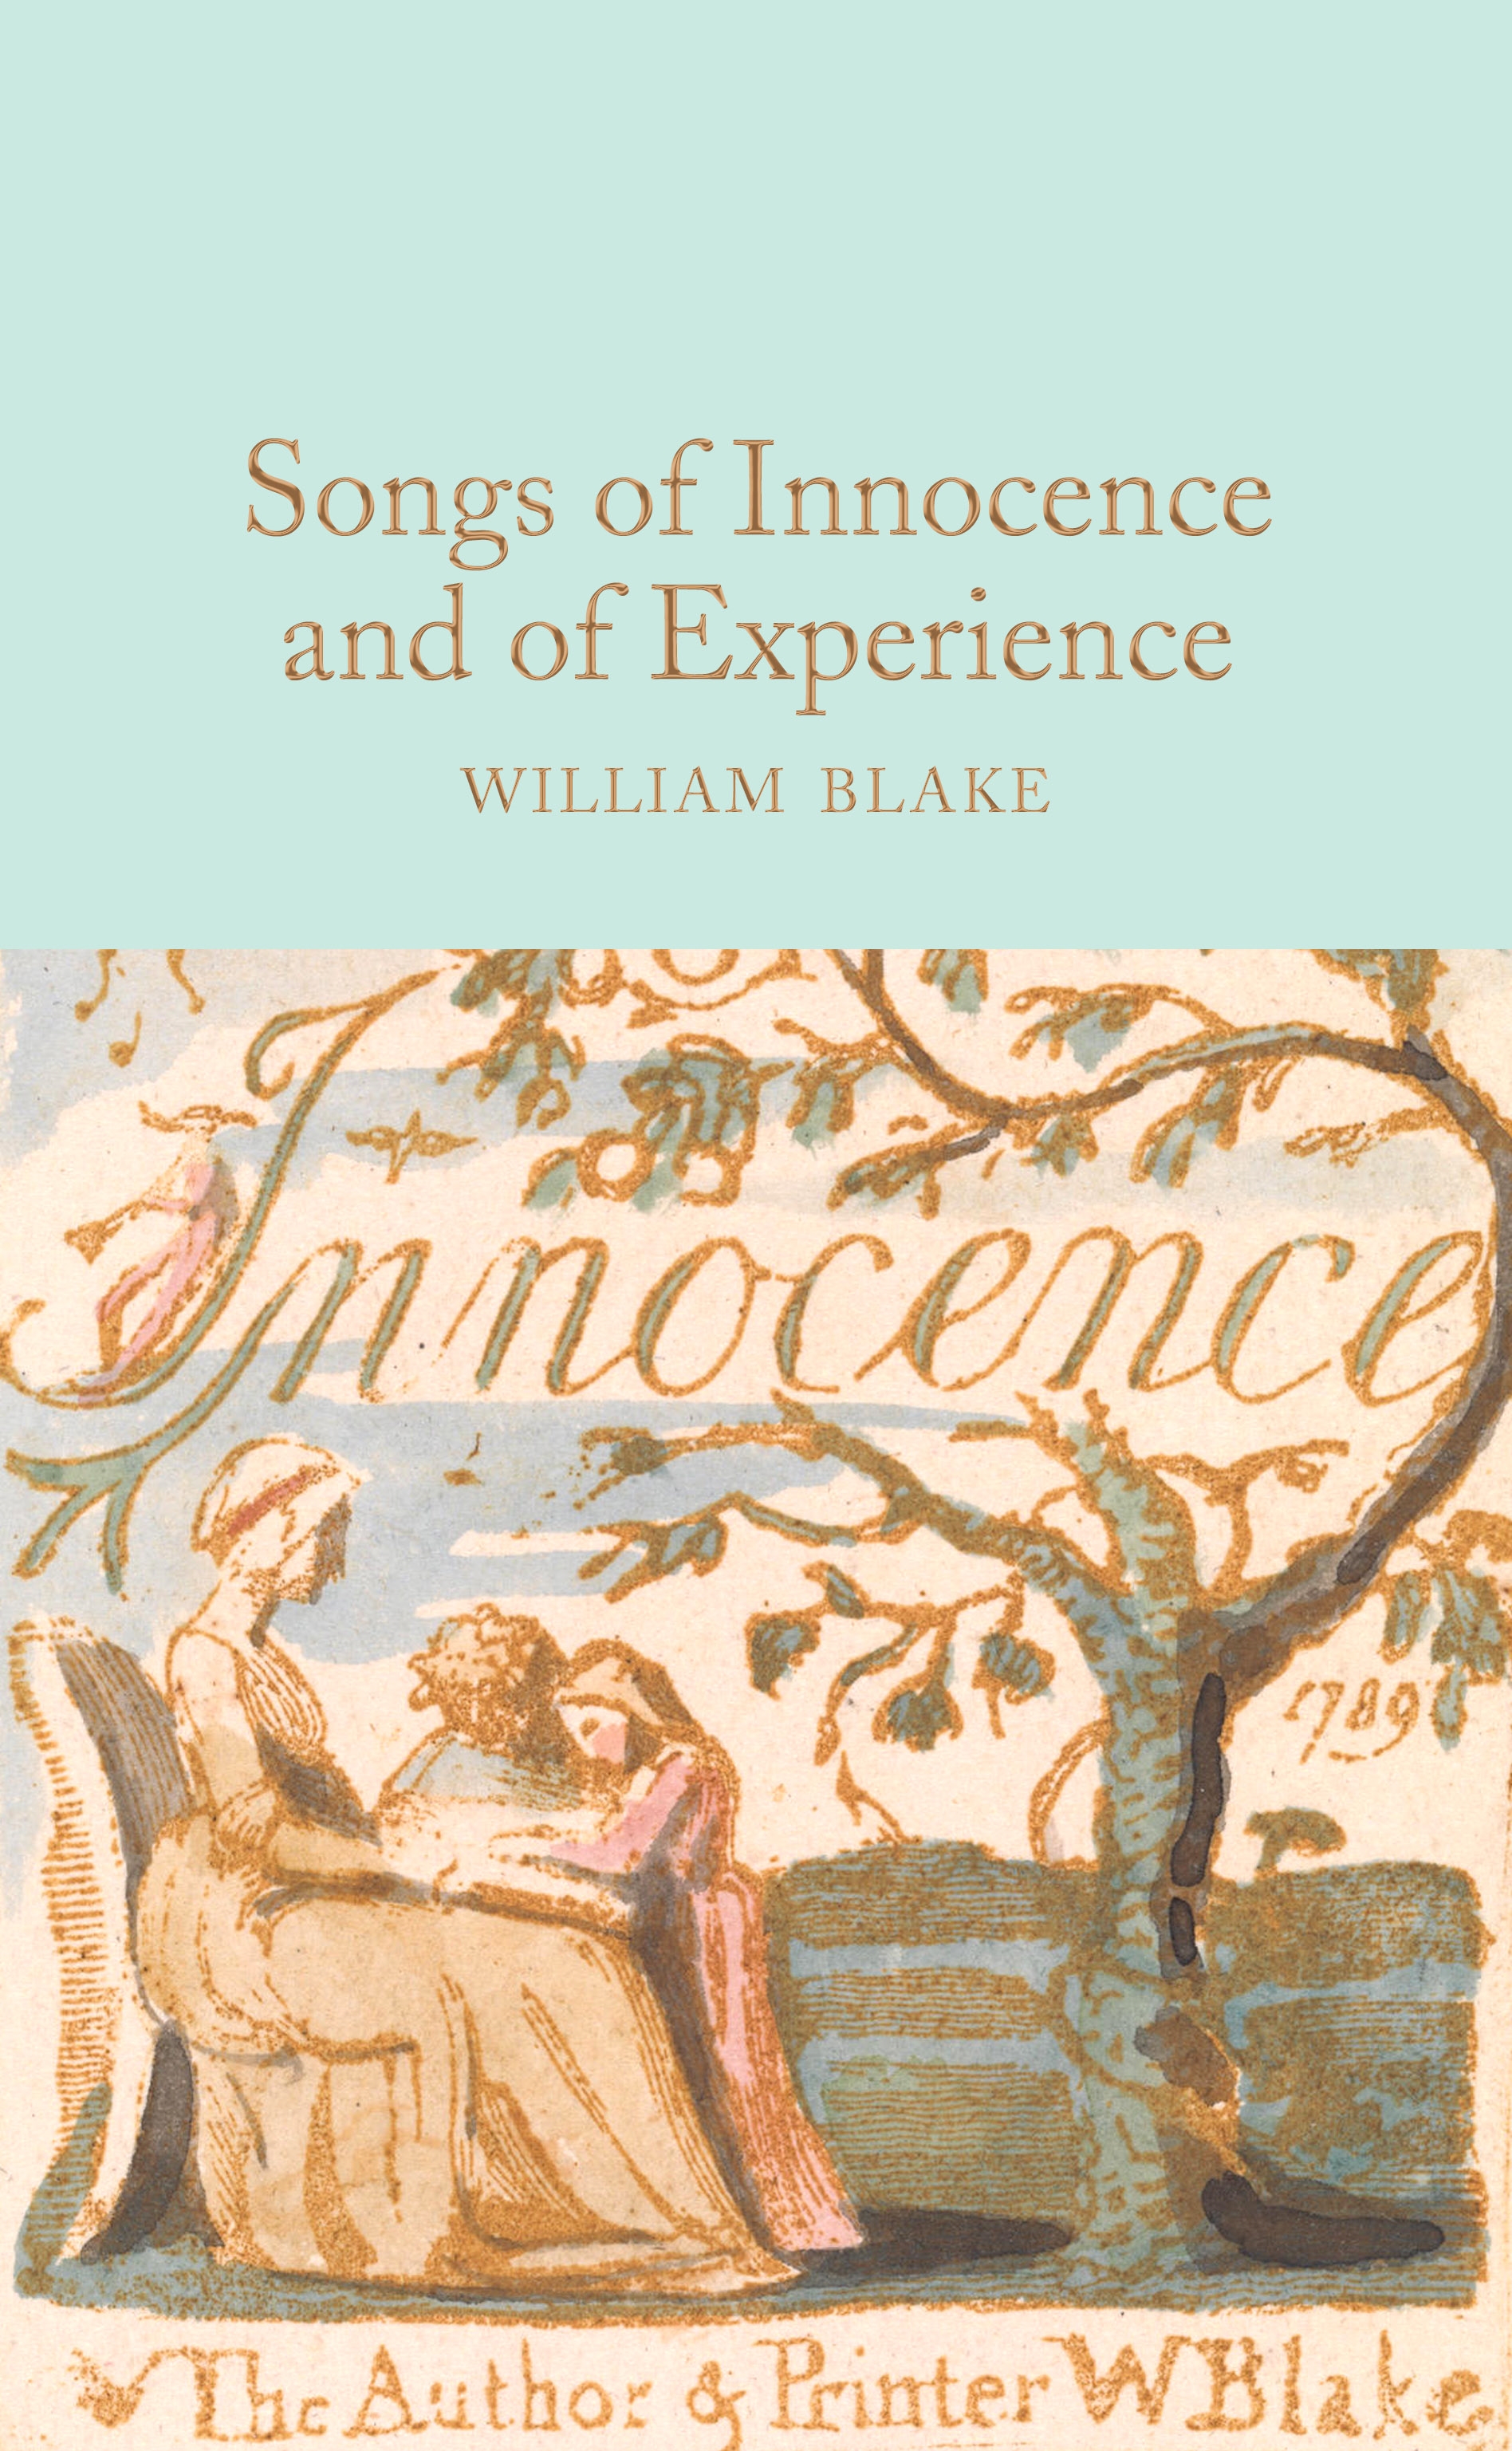 Book “Songs of Innocence and of Experience” by William Blake — August 20, 2019